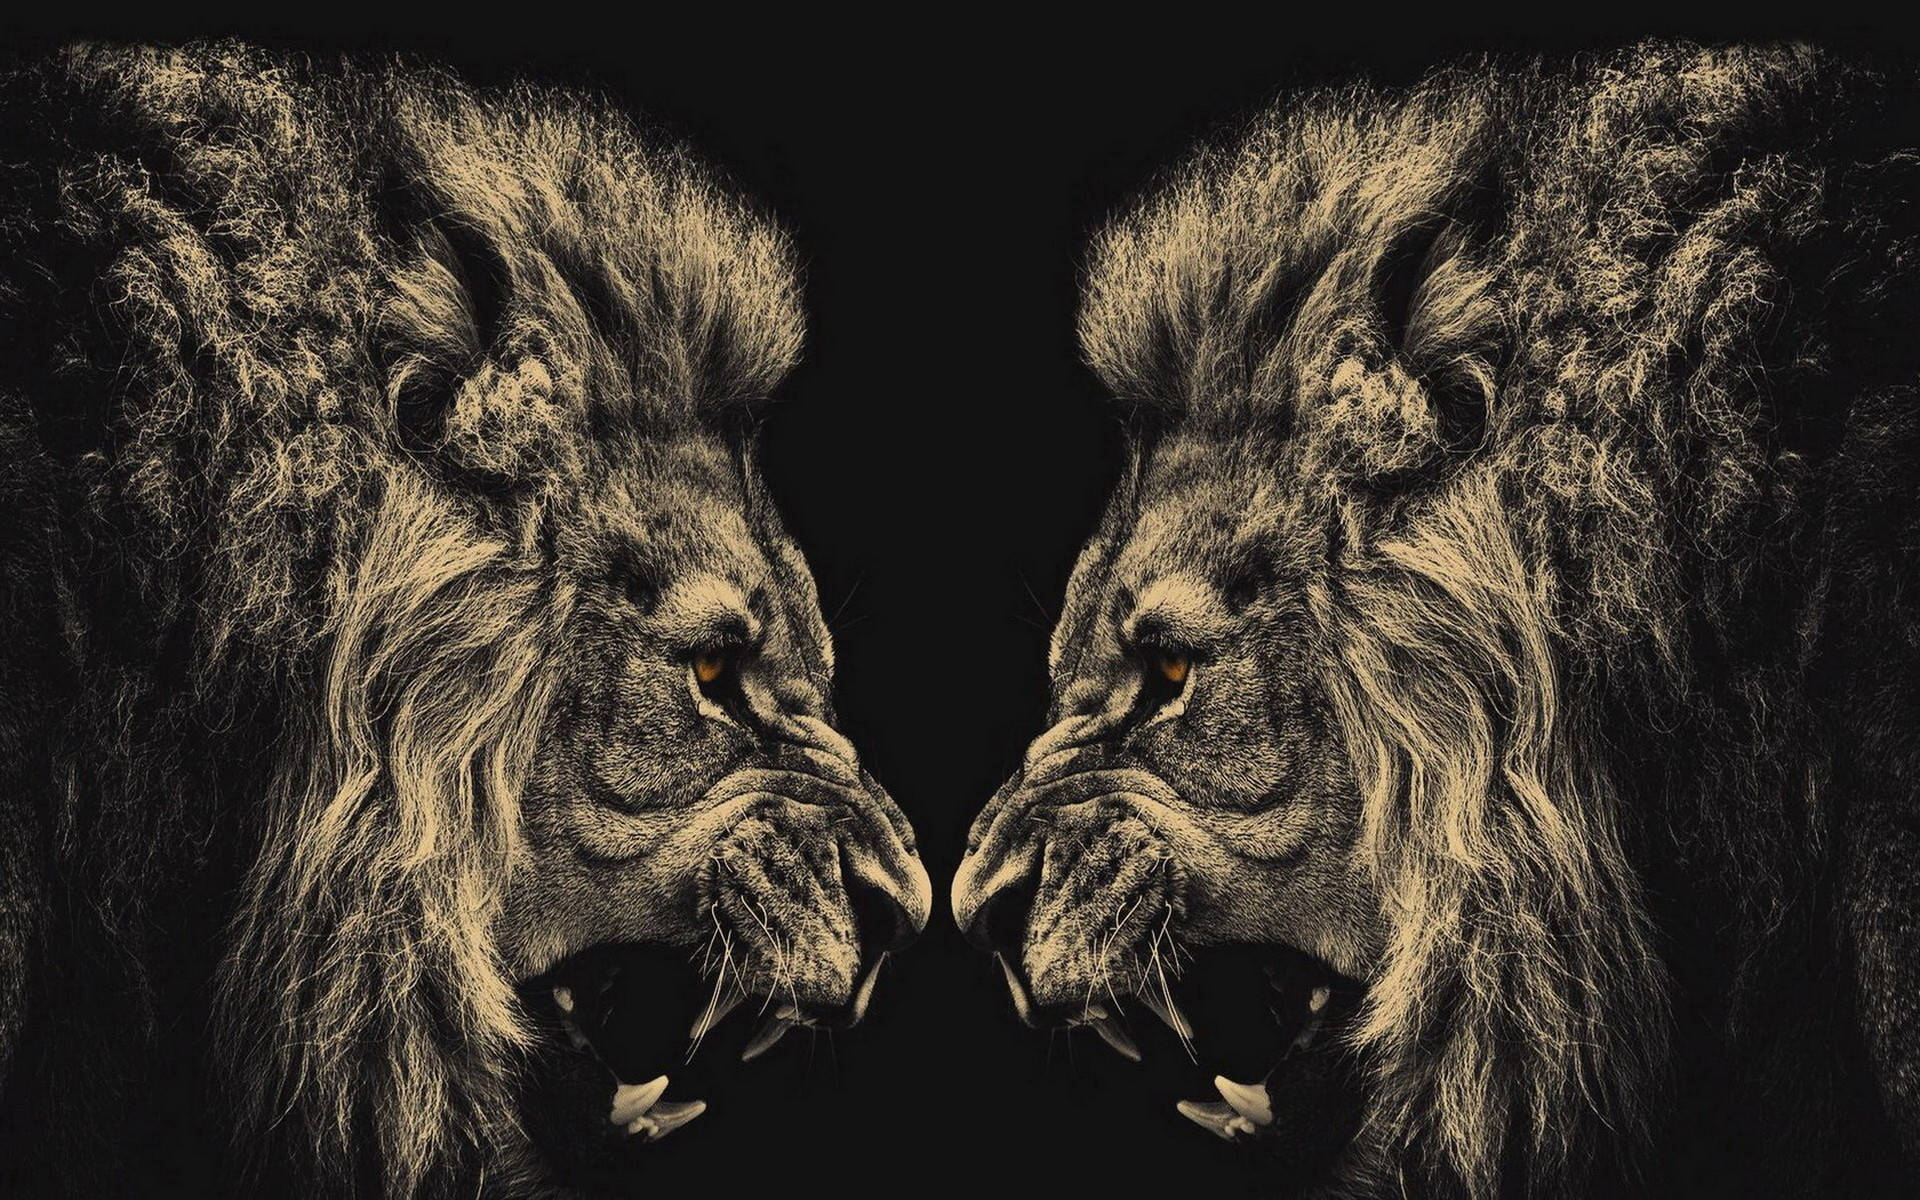 Two Angry Lions Illustration Background